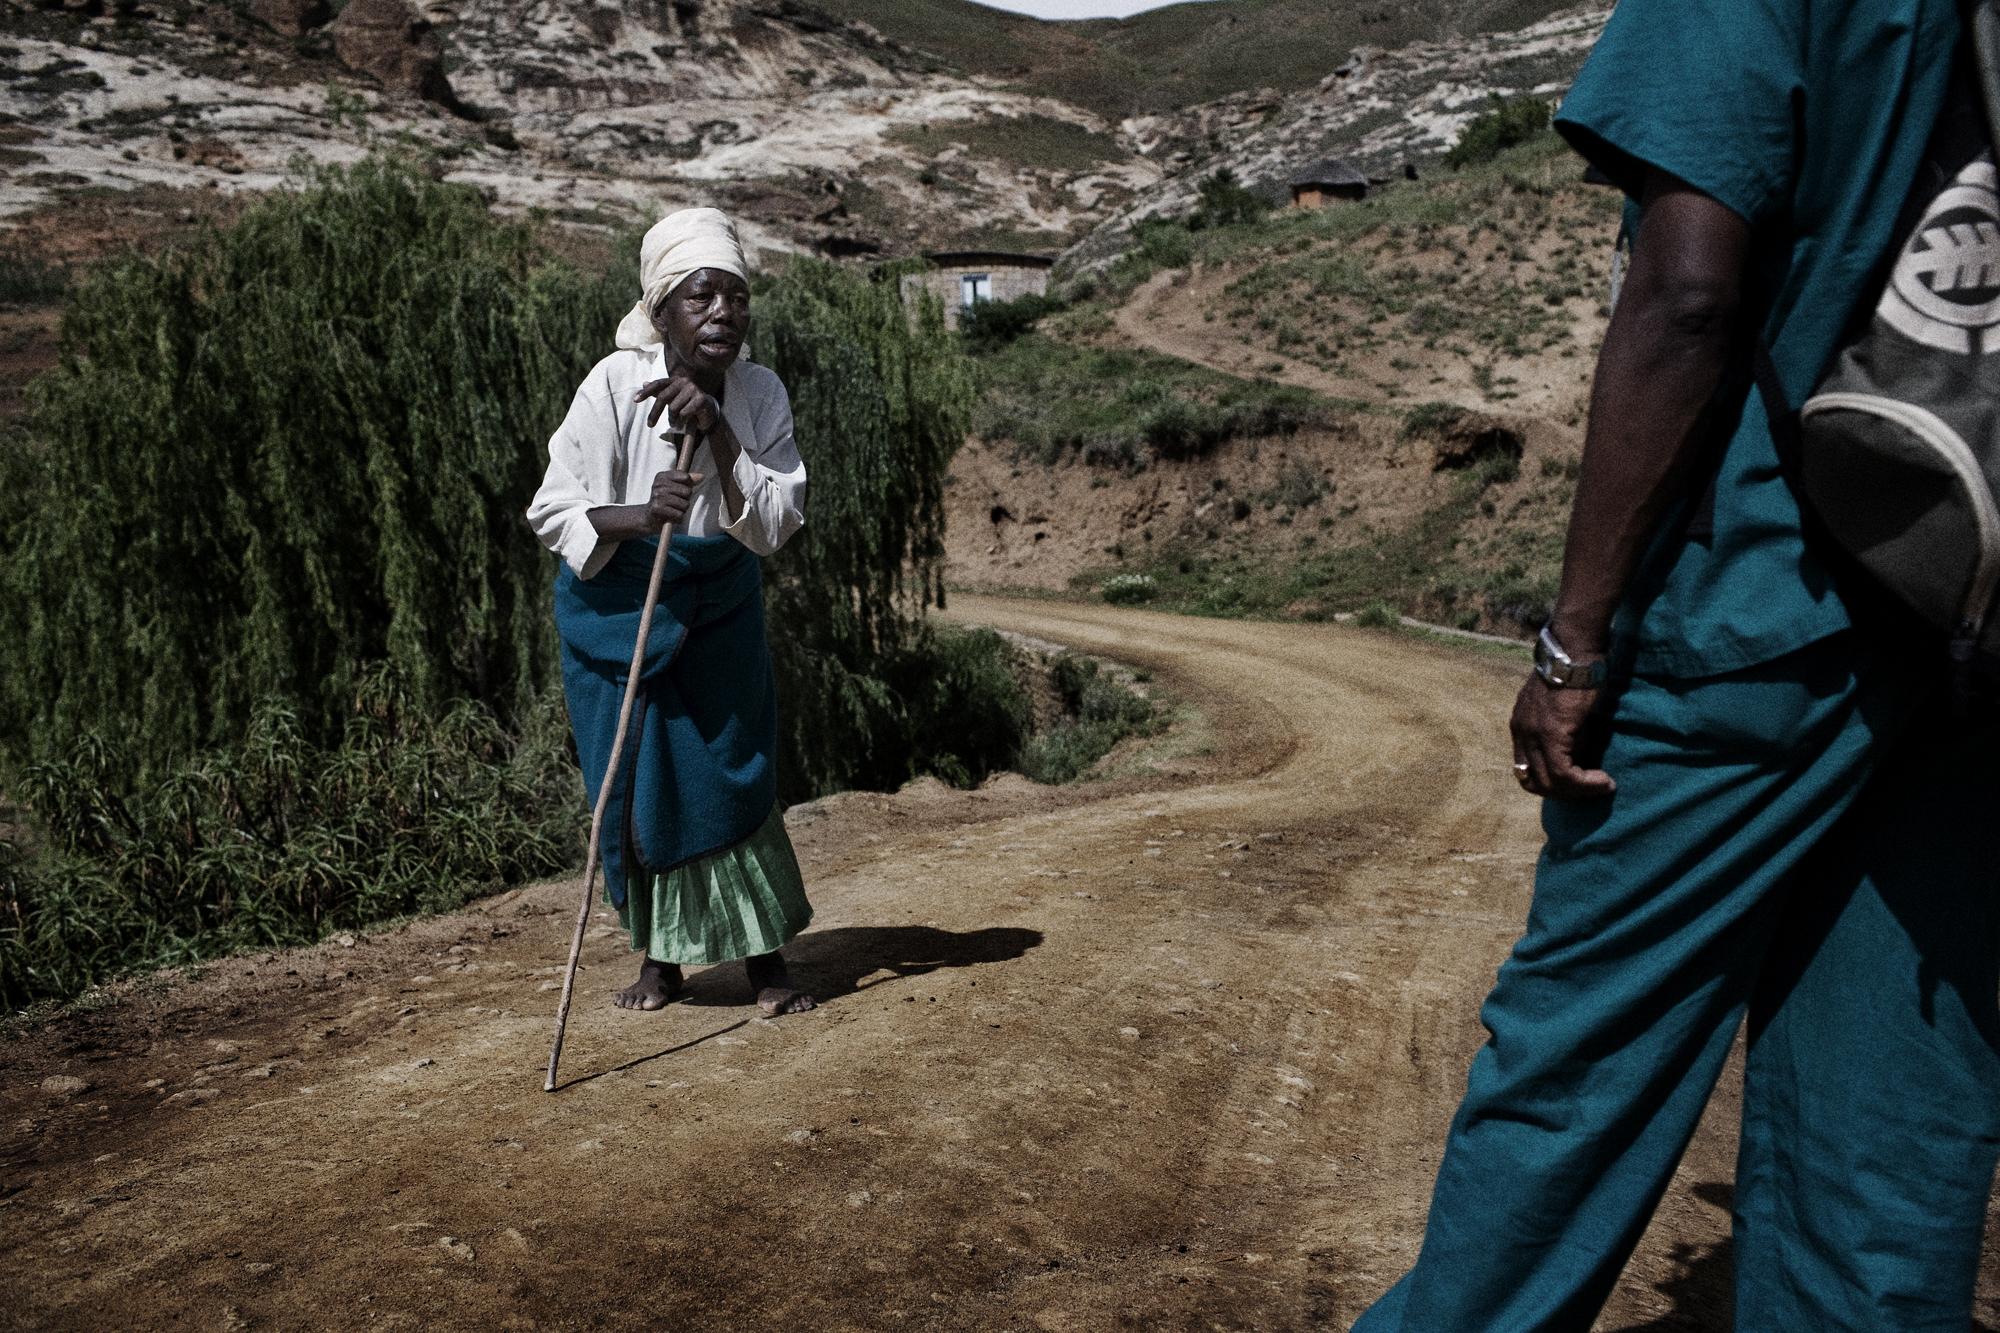 Tuberculosis / Lesotho - Lesotho.
A sick patient walking to the Nohanna clinic....